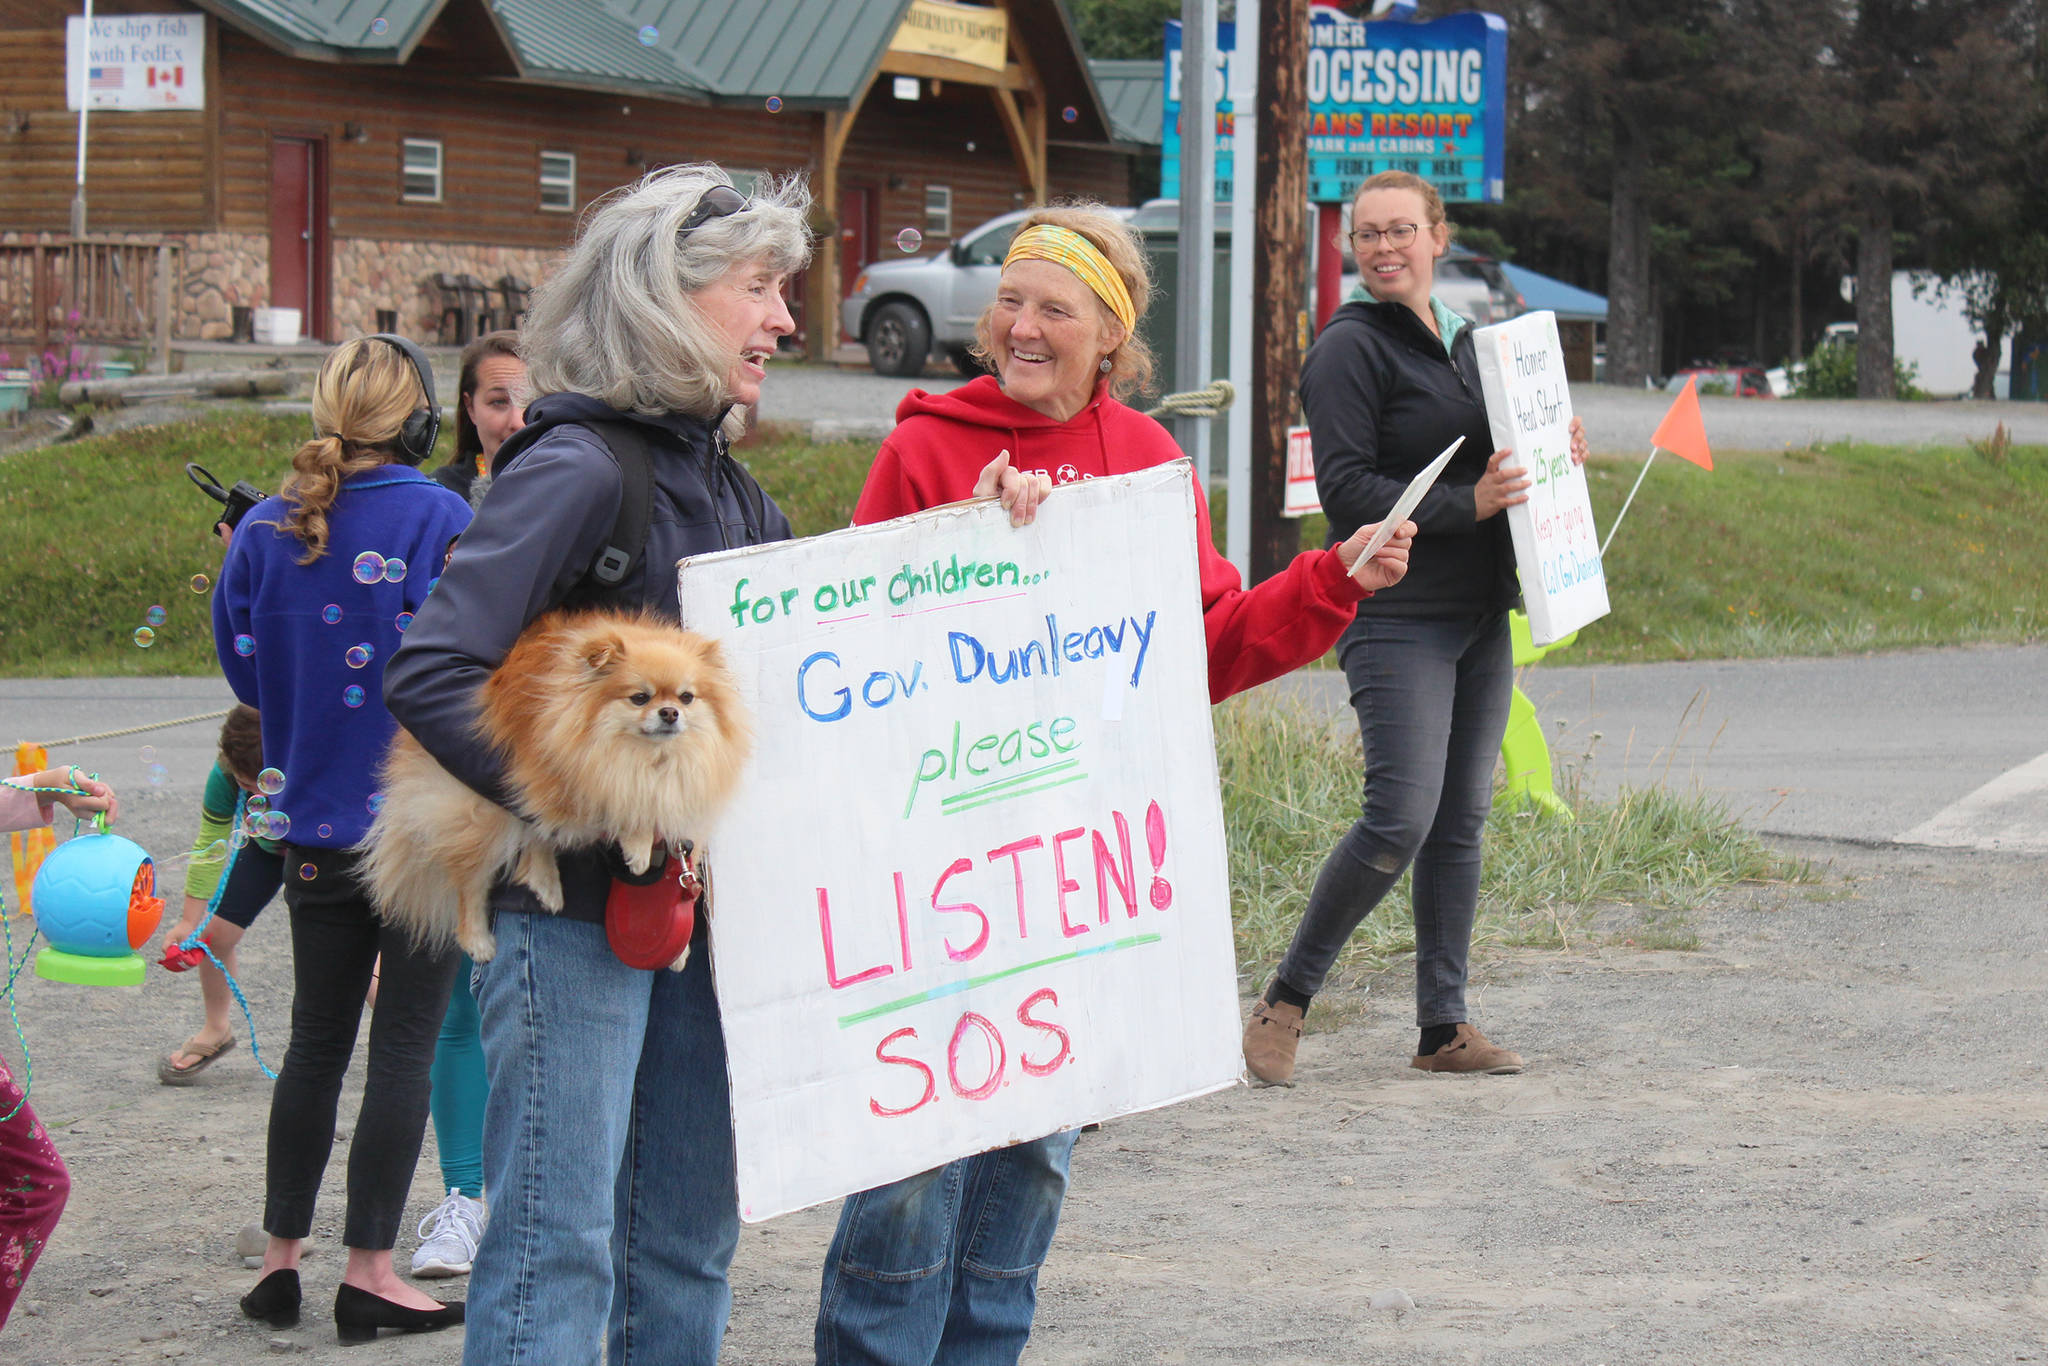 Staff and community members hold a demonstration Thursday, Aug. 1, 2019 outside the Homer Head Start building on Ocean Drive in Homer, Alaska, to protest the veto by Gov. Mike Dunleavy of state funding for head start programs. The Homer location is in danger of being shut down if the vetoes go through. (Photo by Megan Pacer/Homer News)